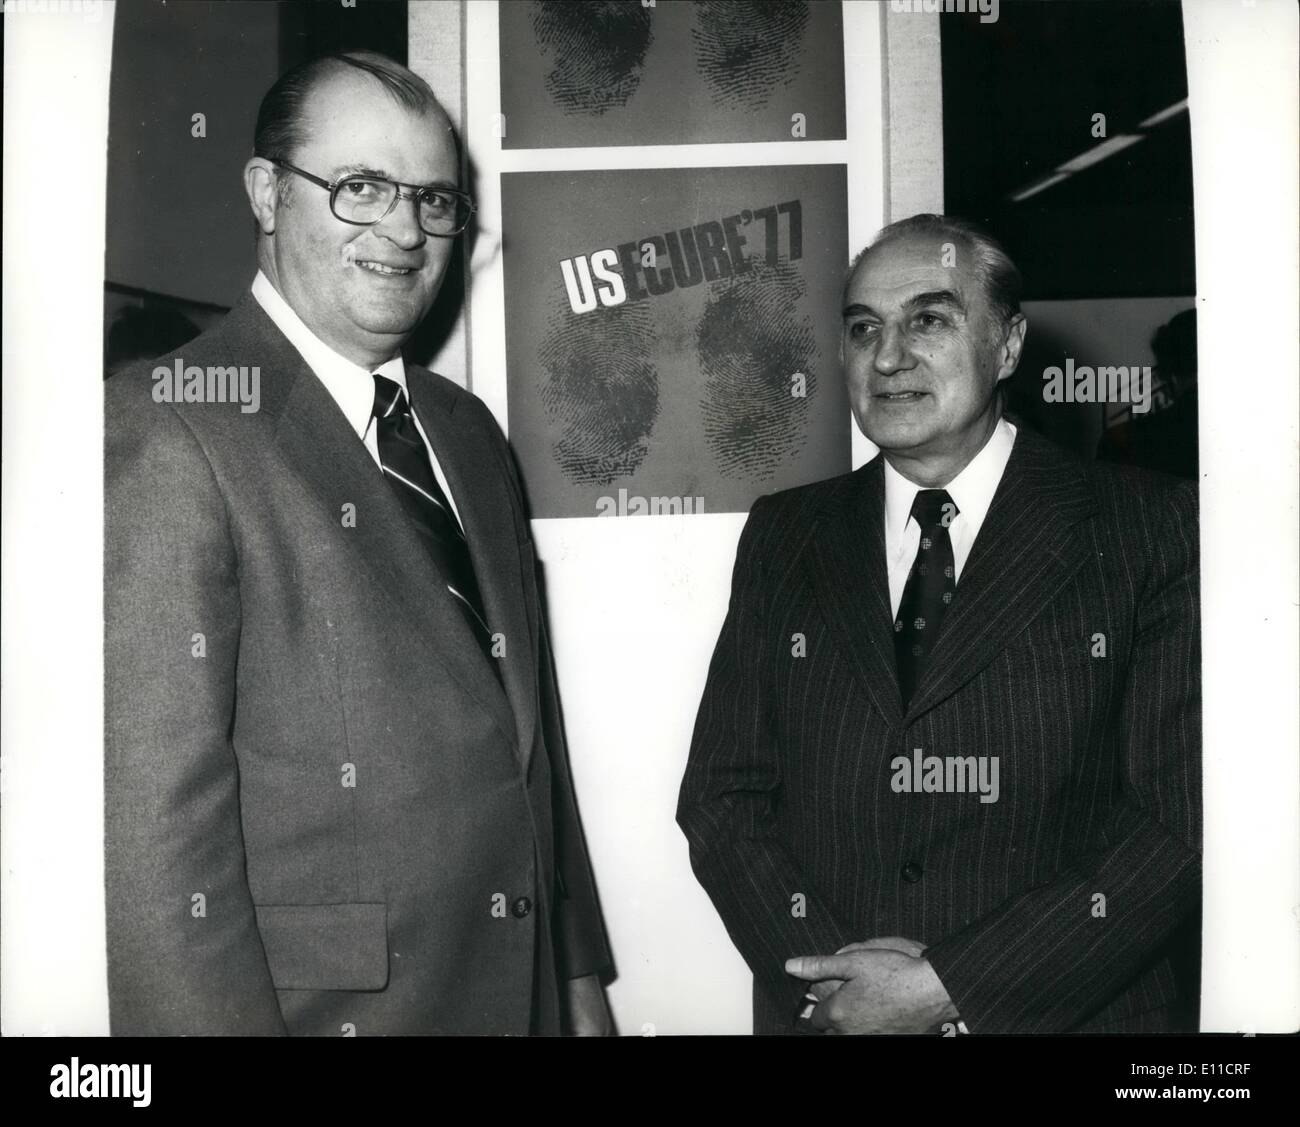 Mar. 03, 1977 - Usecure' 77: An exhibition of Industrial and Commercial Security equipment is now on show at the United States and Trade Center, Langham Place in London. Photo shows pictured at the exhibition are left, Mr. Jay Cockrane Asst Director of the F.B.I. and Mr. Jean Nepote Secretary General of Interpol Stock Photo